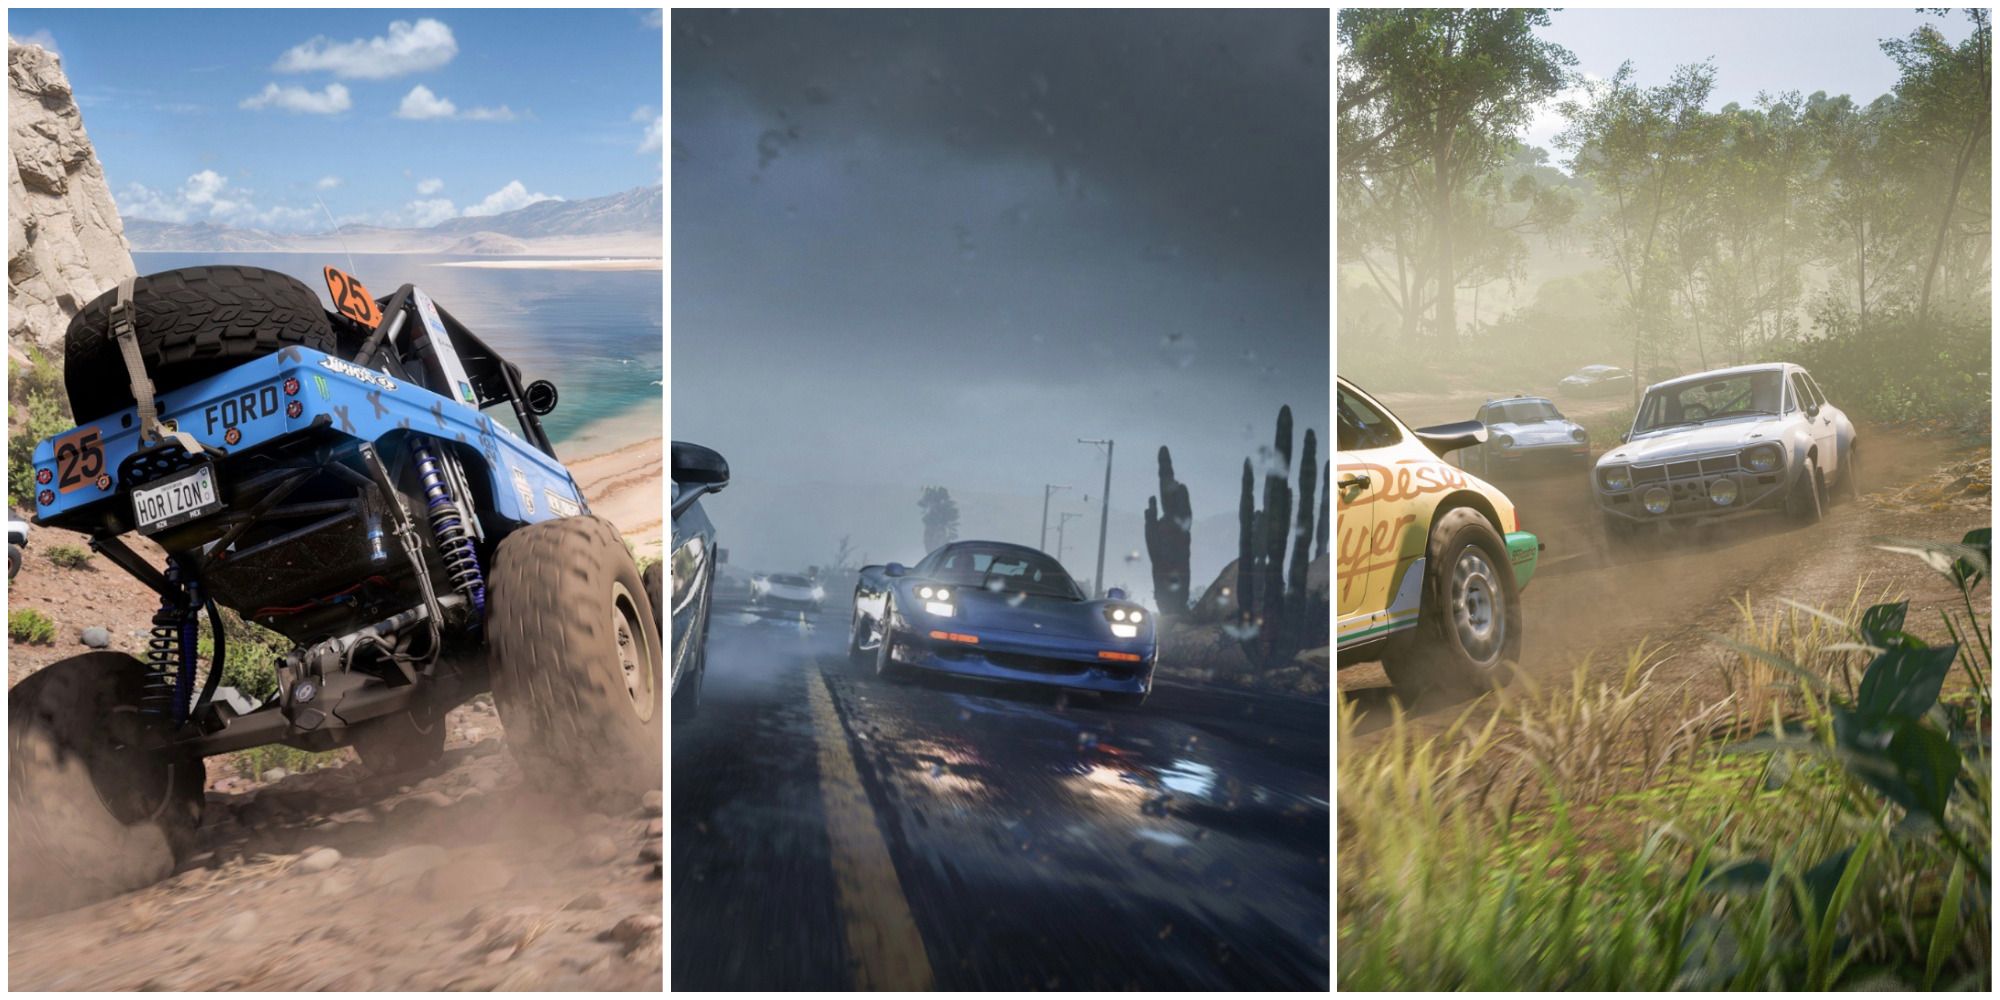 Forza Horizon 5' best rally cars: 6 fastest off-road vehicles to unlock